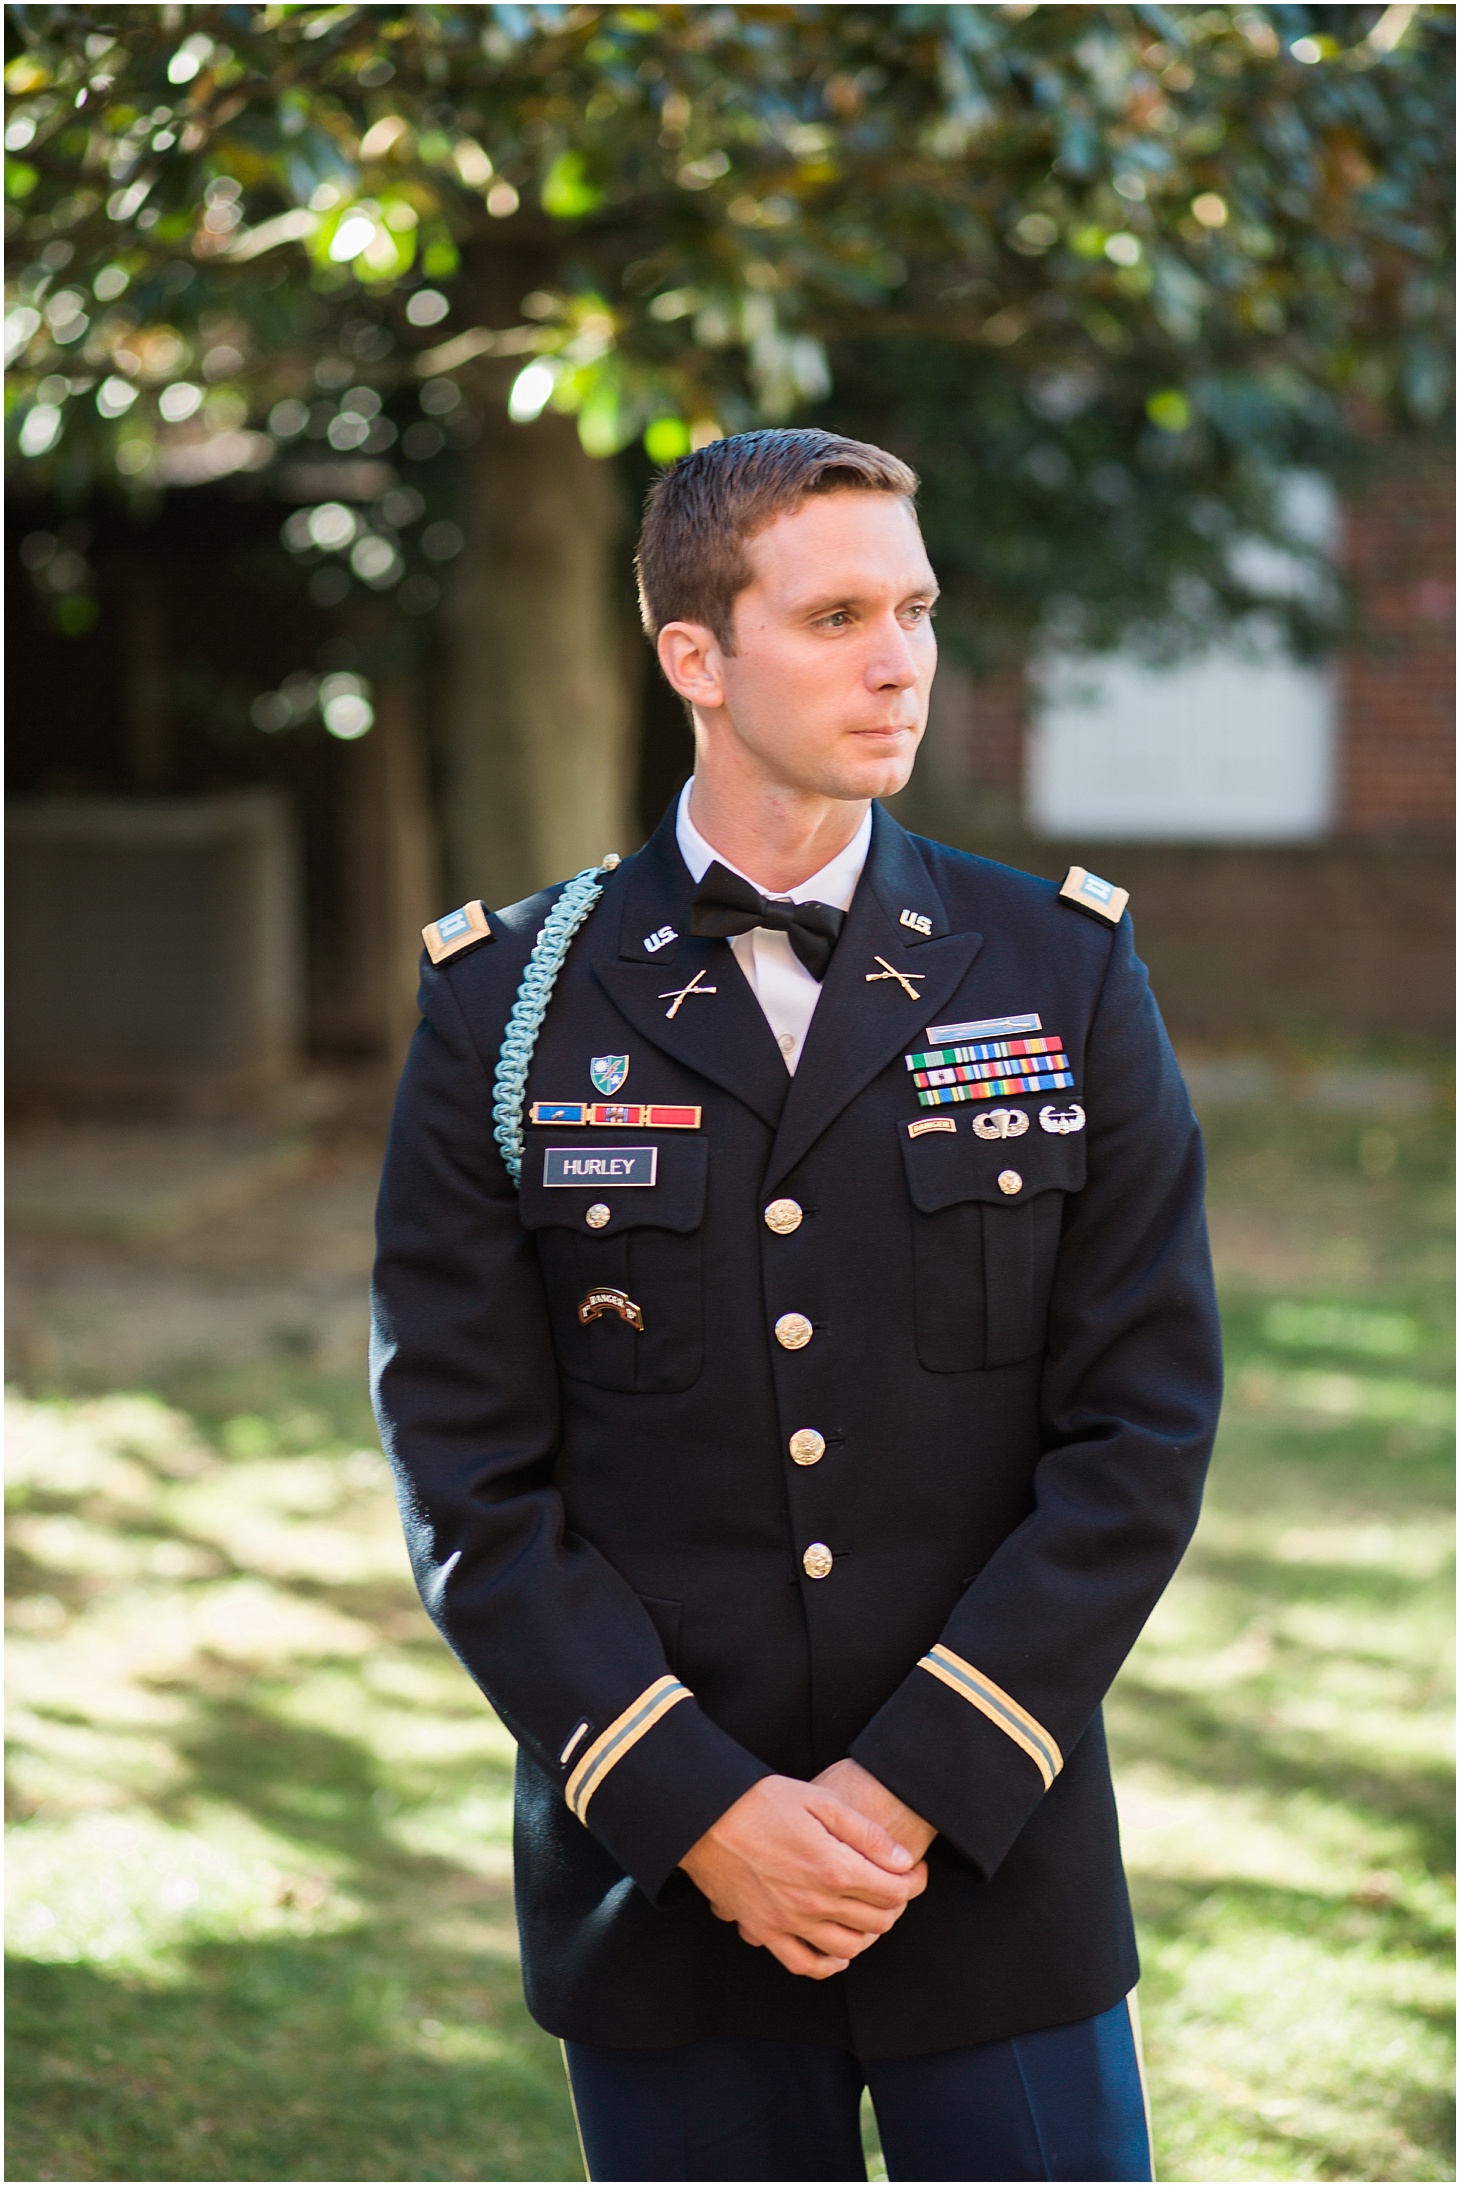 Groom Portrait in Army Dress Uniform | Wedding Ceremony at Old Presbyterian Meeting House | Southern Black Tie wedding at St. Regis DC in Dusty Blue and Ivory | Sarah Bradshaw Photography